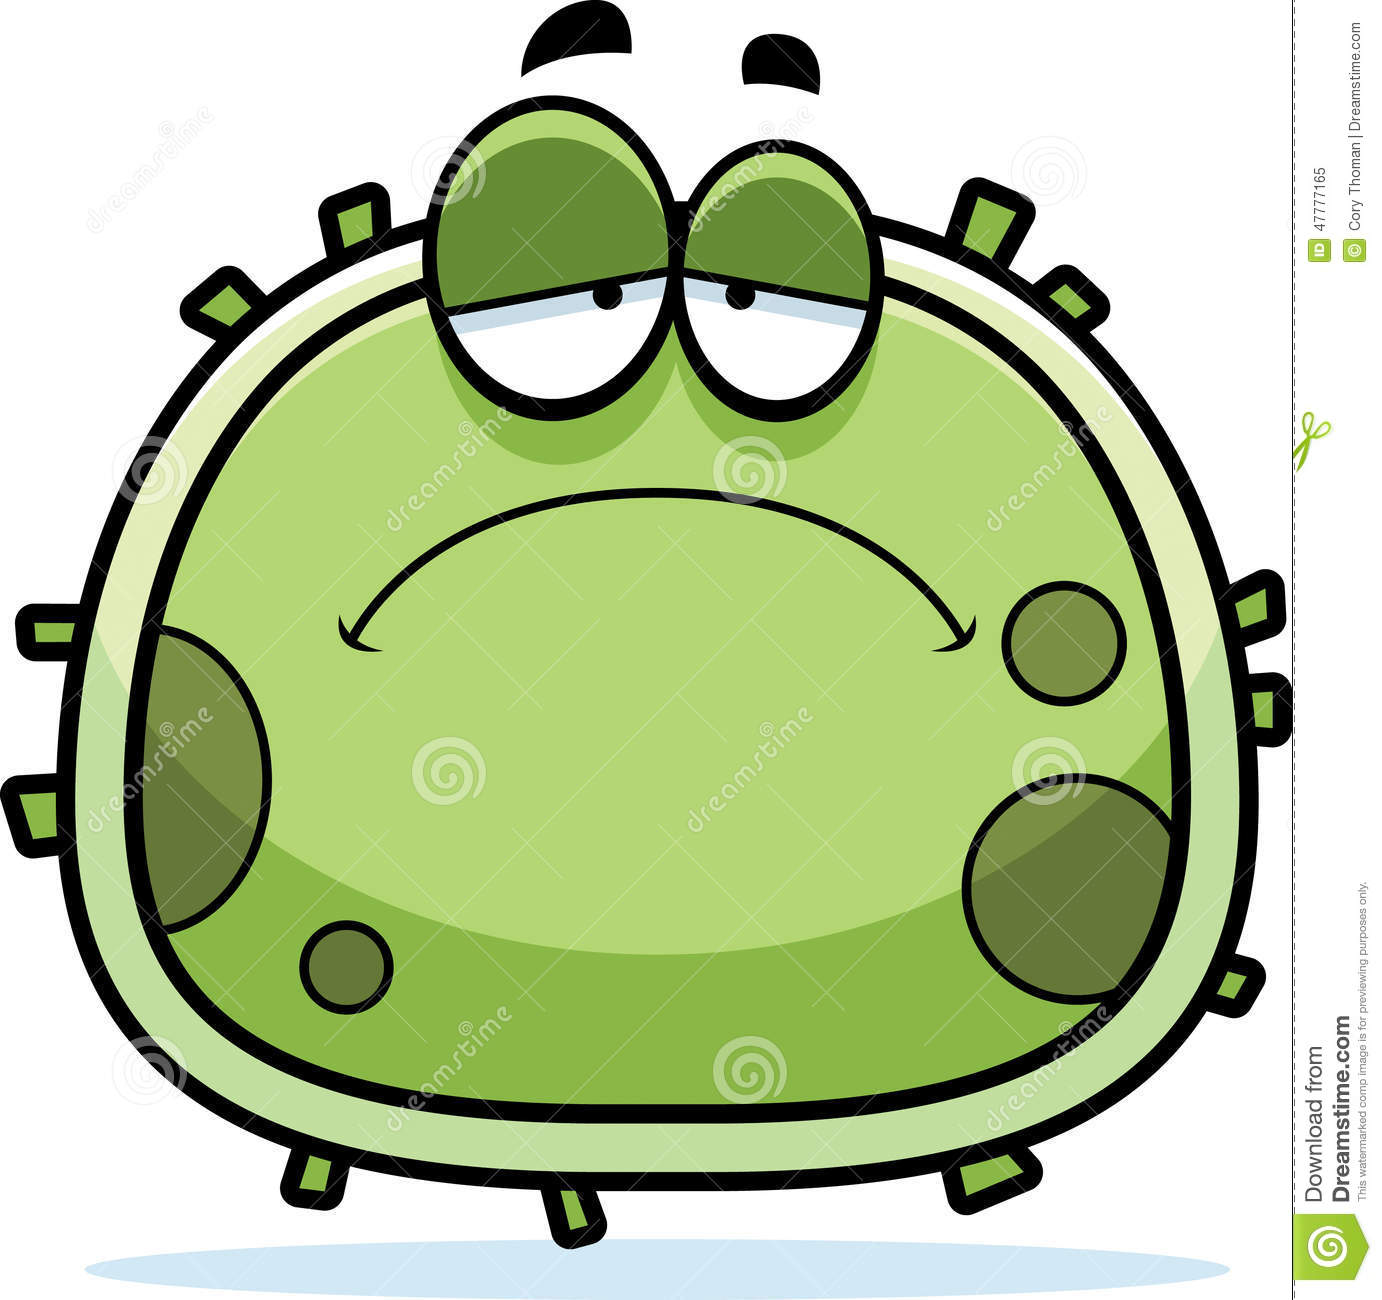 Pictures of germs free. Bacteria clipart sad